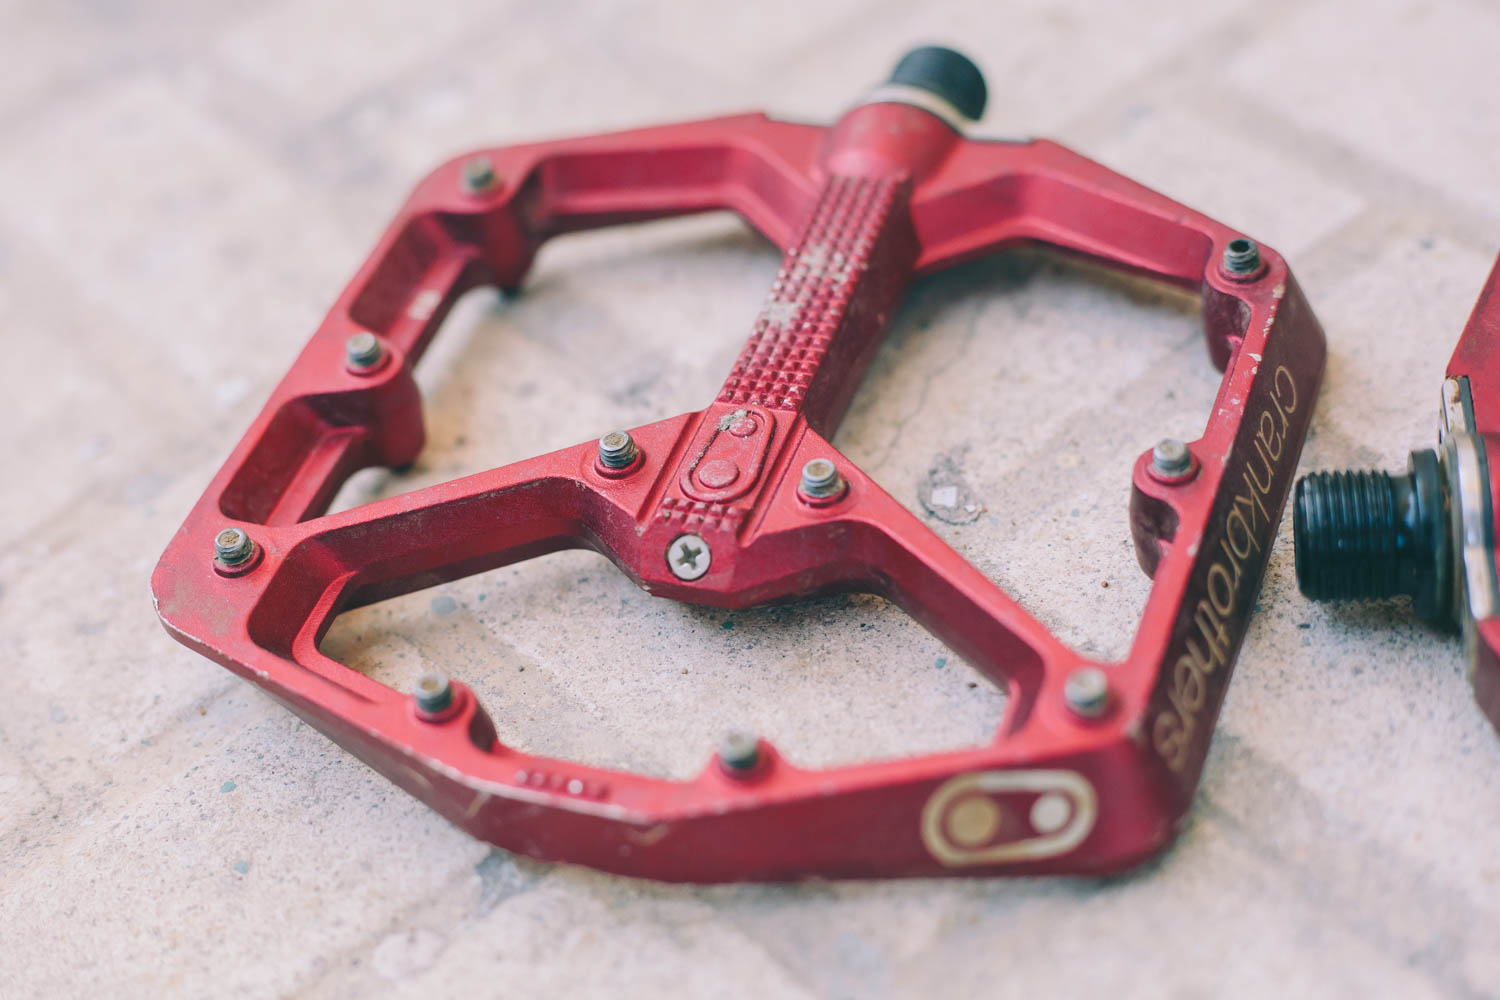 crank brothers stamp flat pedals